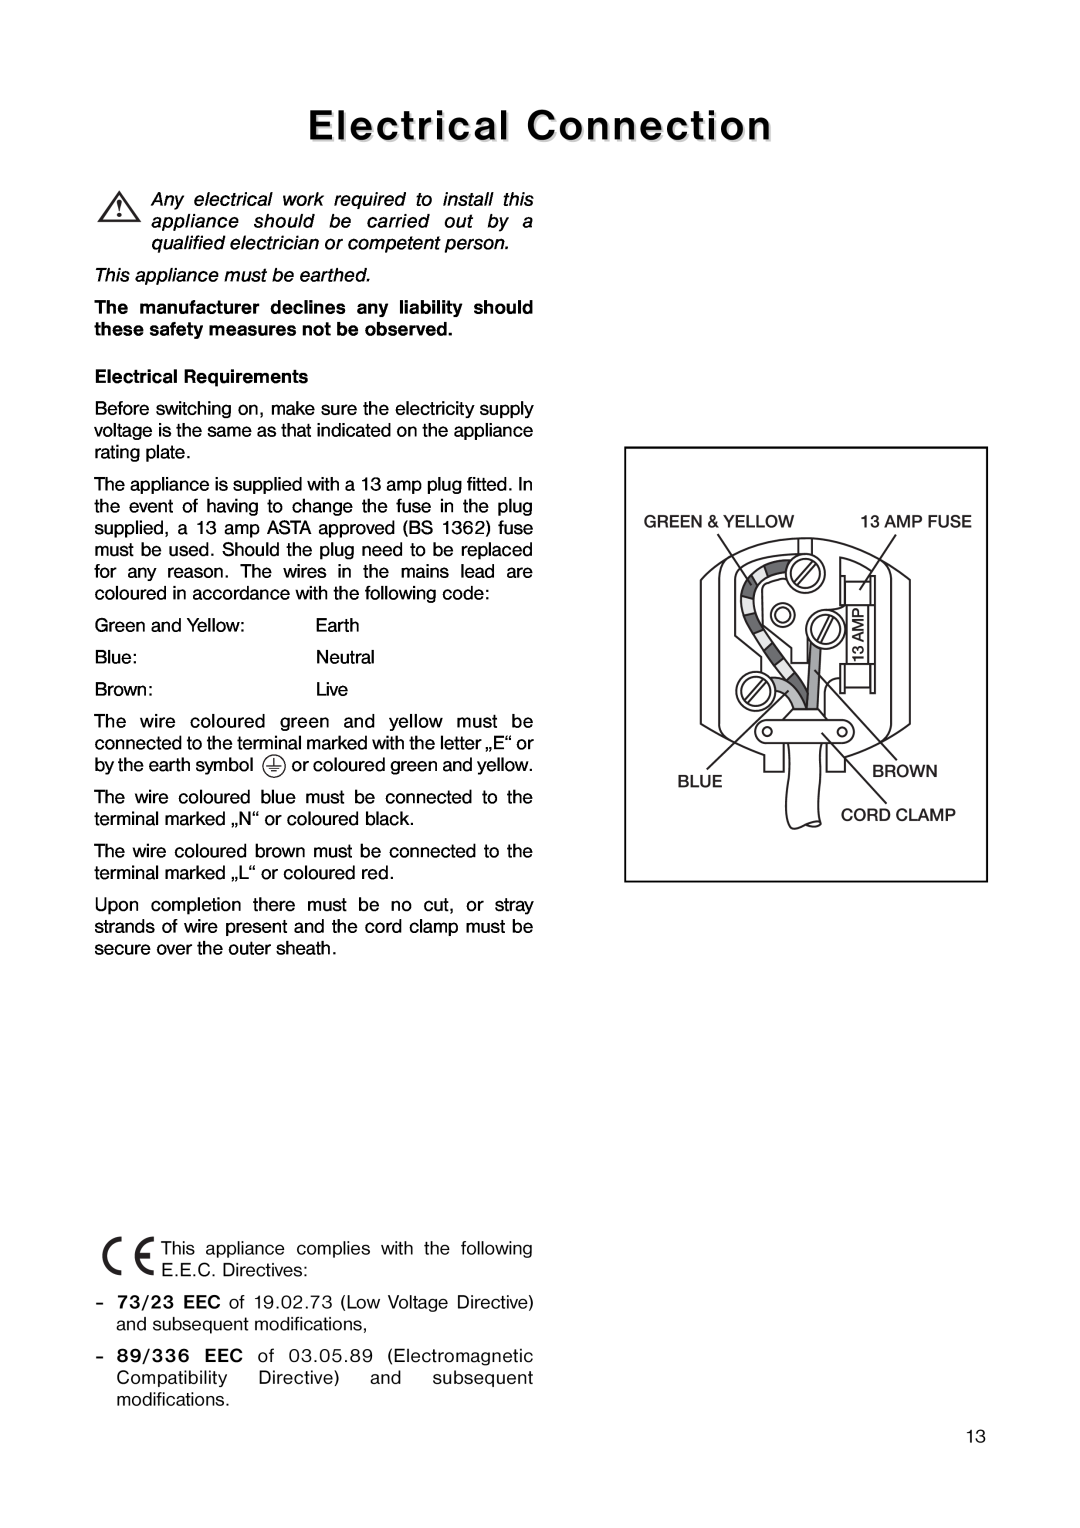 Zanussi ZT 25 manual Electrical Connection, This appliance must be earthed, Electrical Requirements 